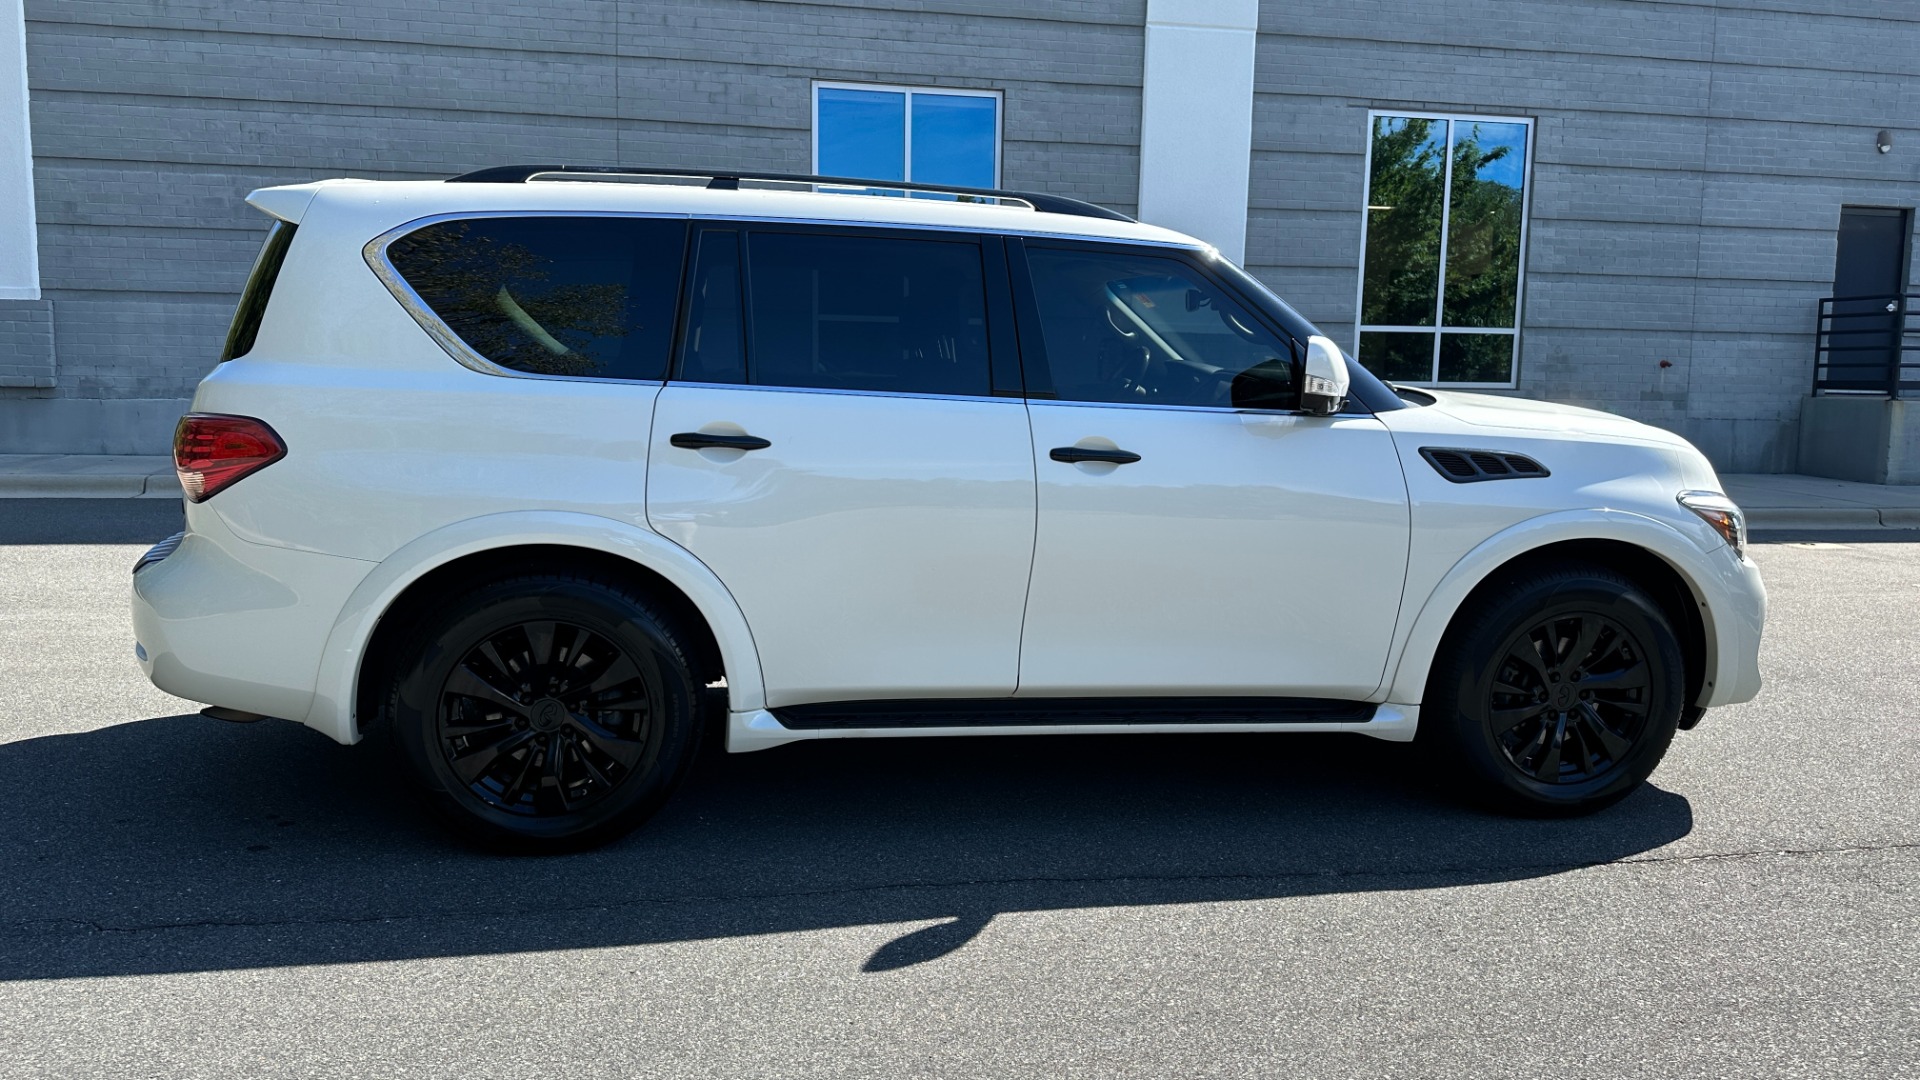 Used 2017 INFINITI QX80 SIGNATURE EDITION / 3 ROW SEATING / NAV / LEATHER for sale $25,995 at Formula Imports in Charlotte NC 28227 8